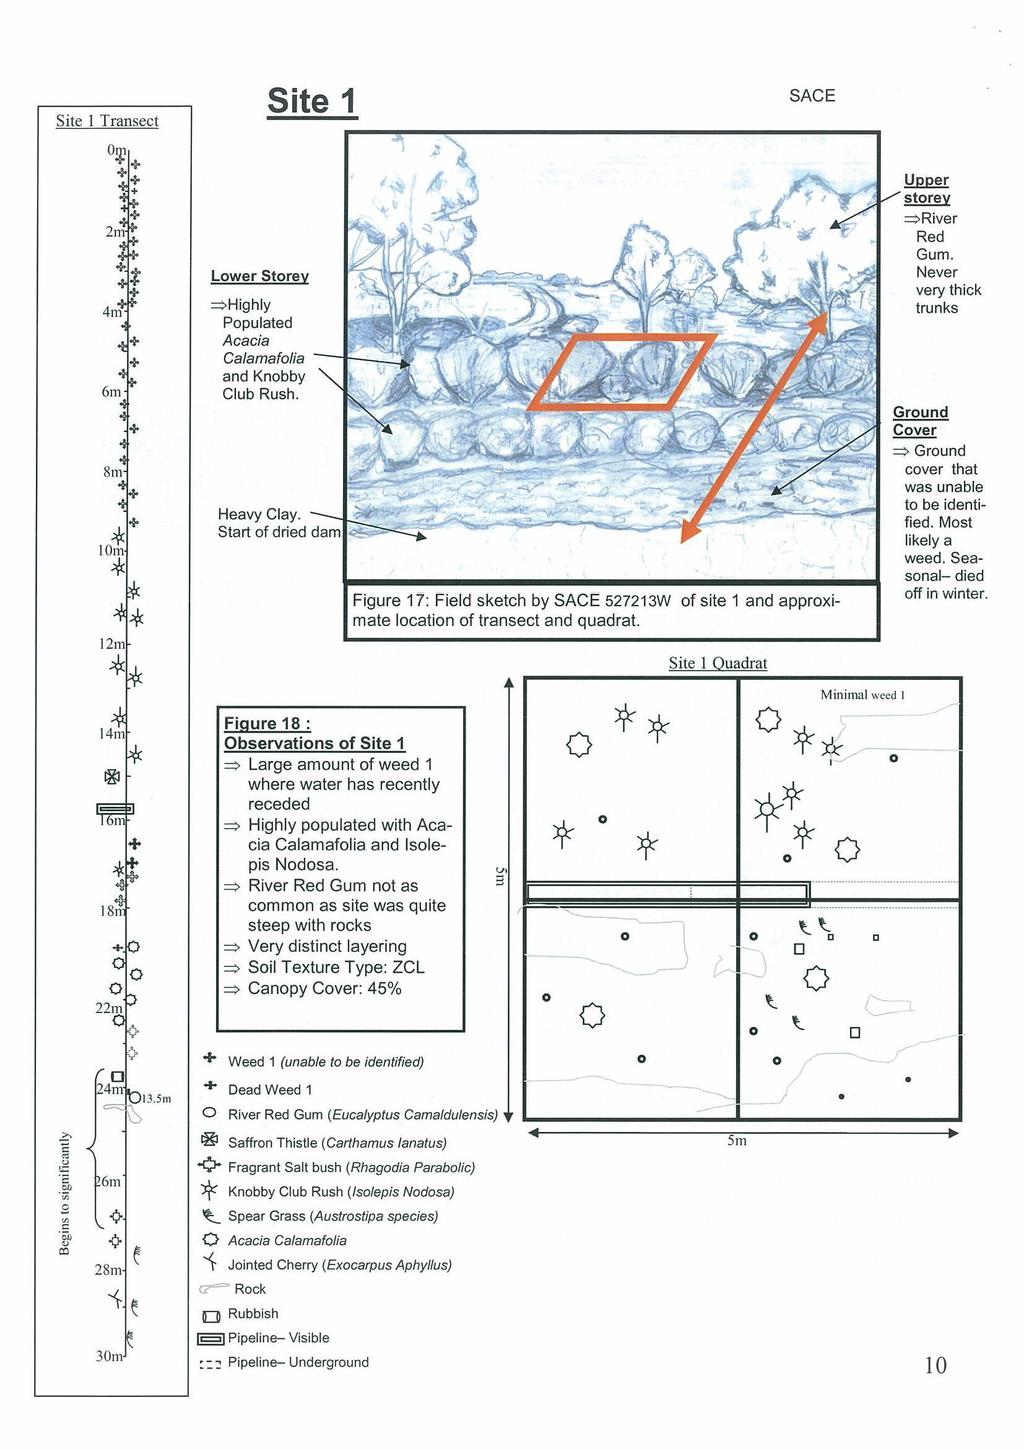 Figure 17: Field sketch by student of site 1 and